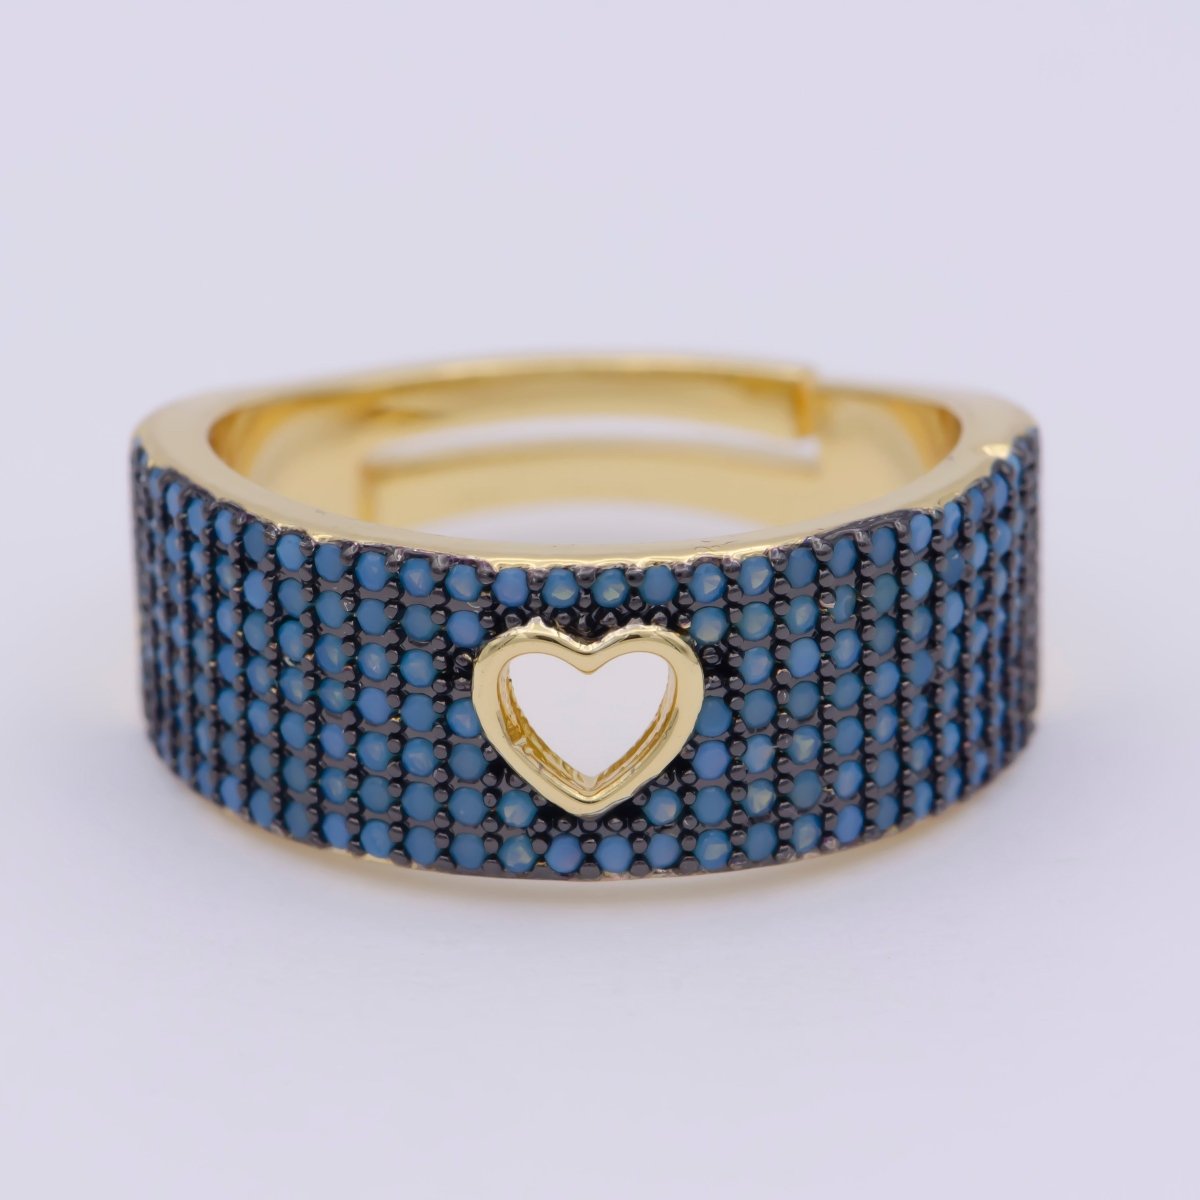 Dainty Heart Adjustable Ring, Gold Cz Dark Ring, Blue Green Purple Teal Stone Heart Jewelry Trend | O-460 ~ O-464 - DLUXCA